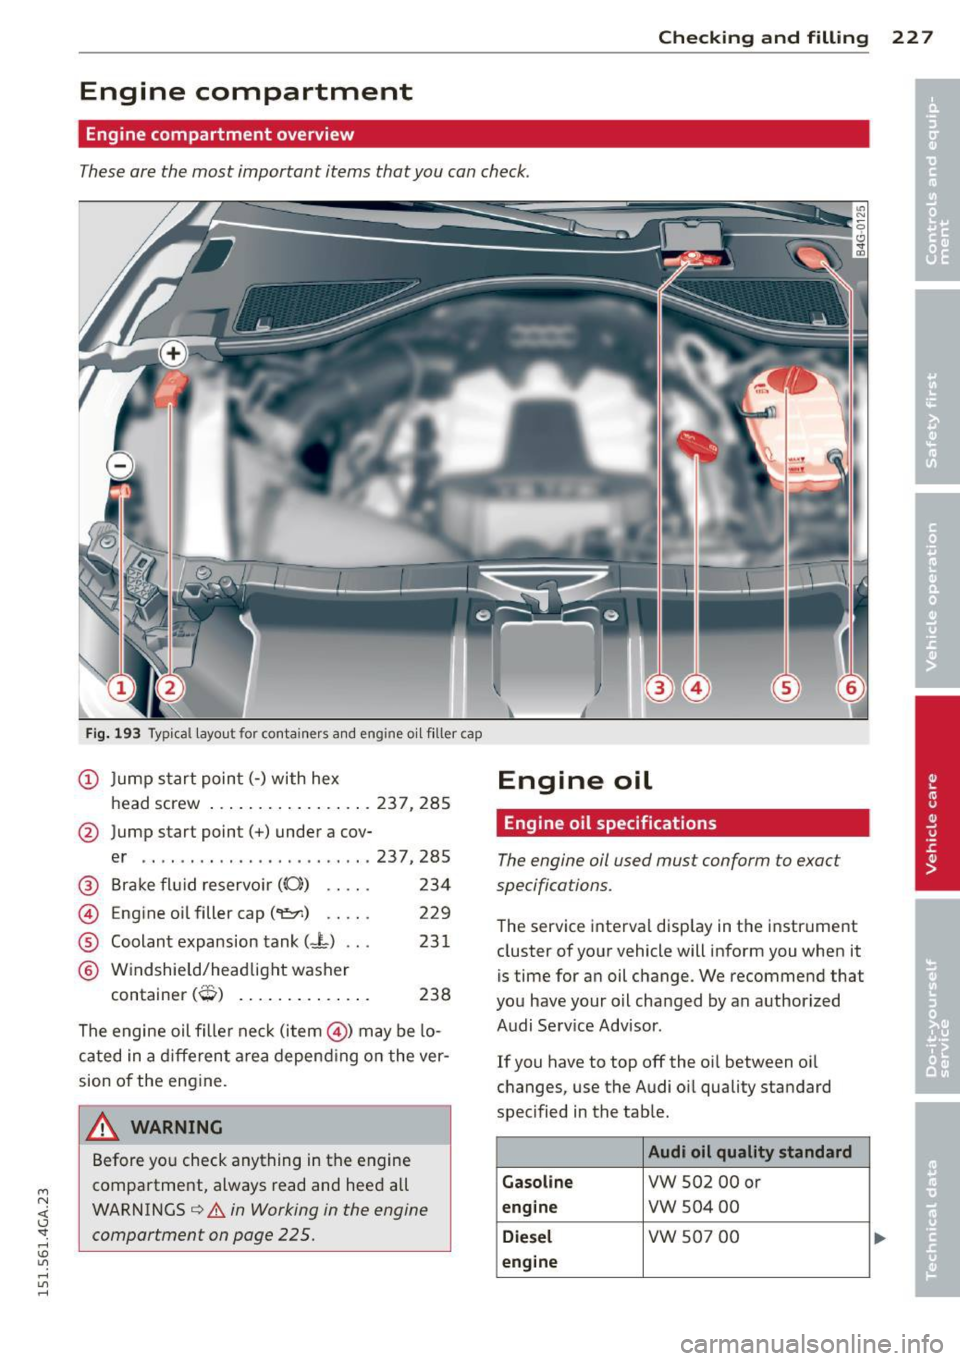 AUDI A7 2015  Owners Manual M N <( I.J "". rl I.O 
" rl 
" rl 
Checking and  fillin g 22 7 
Engine  compartment 
Engine  compartment  overview 
These are the  most  important  items  that you  can check. 
Fig.  193 Typical l a